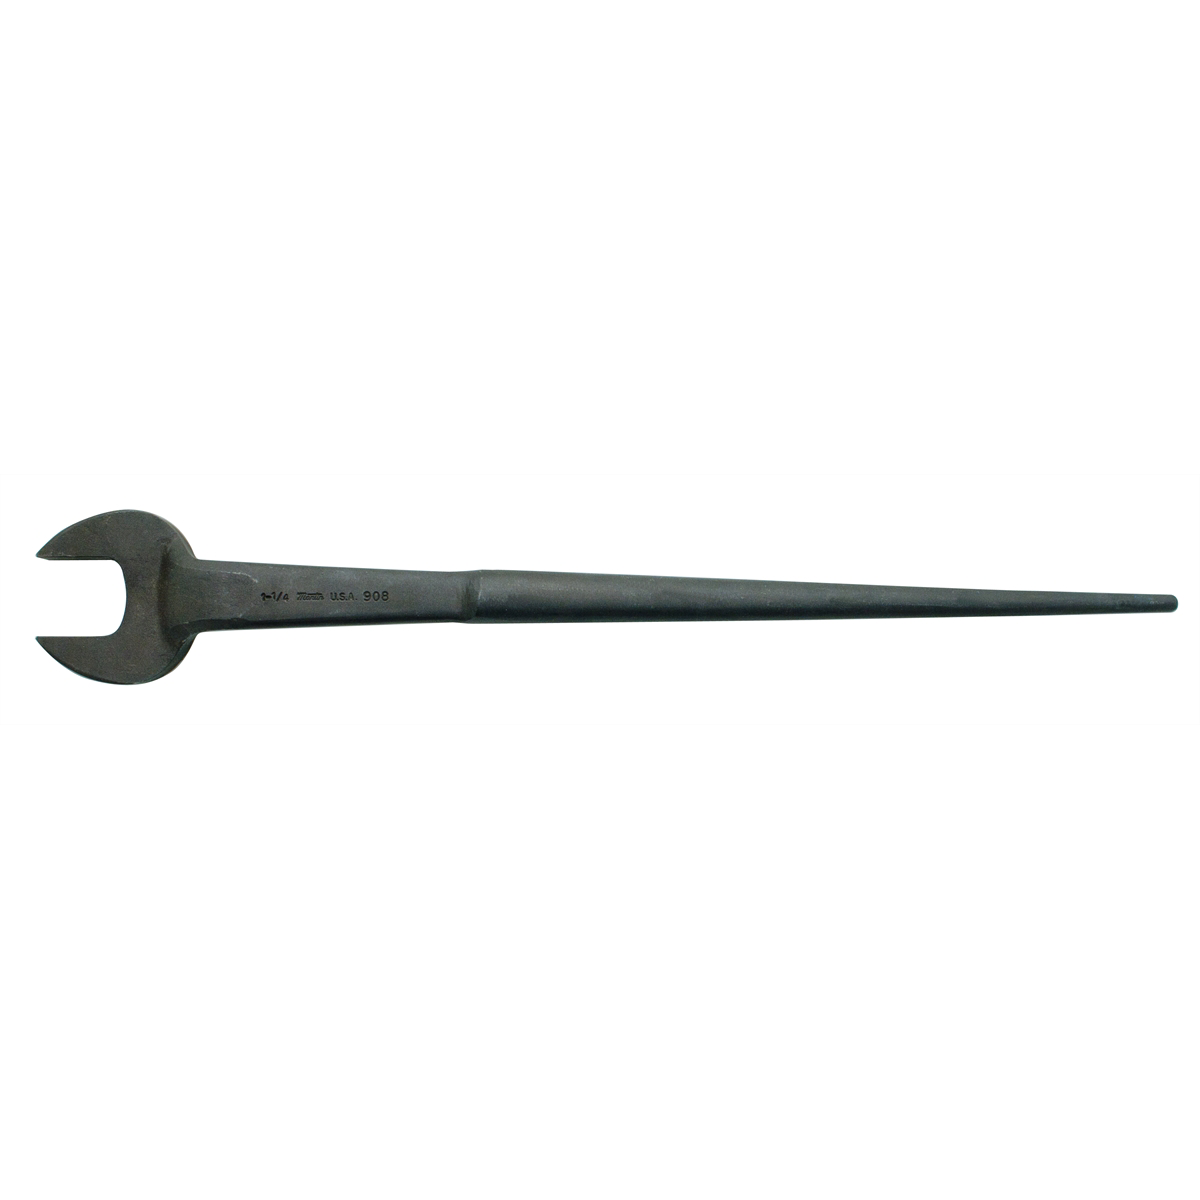 1-1/4 Inch Fractional SAE Structural Offset Wrench